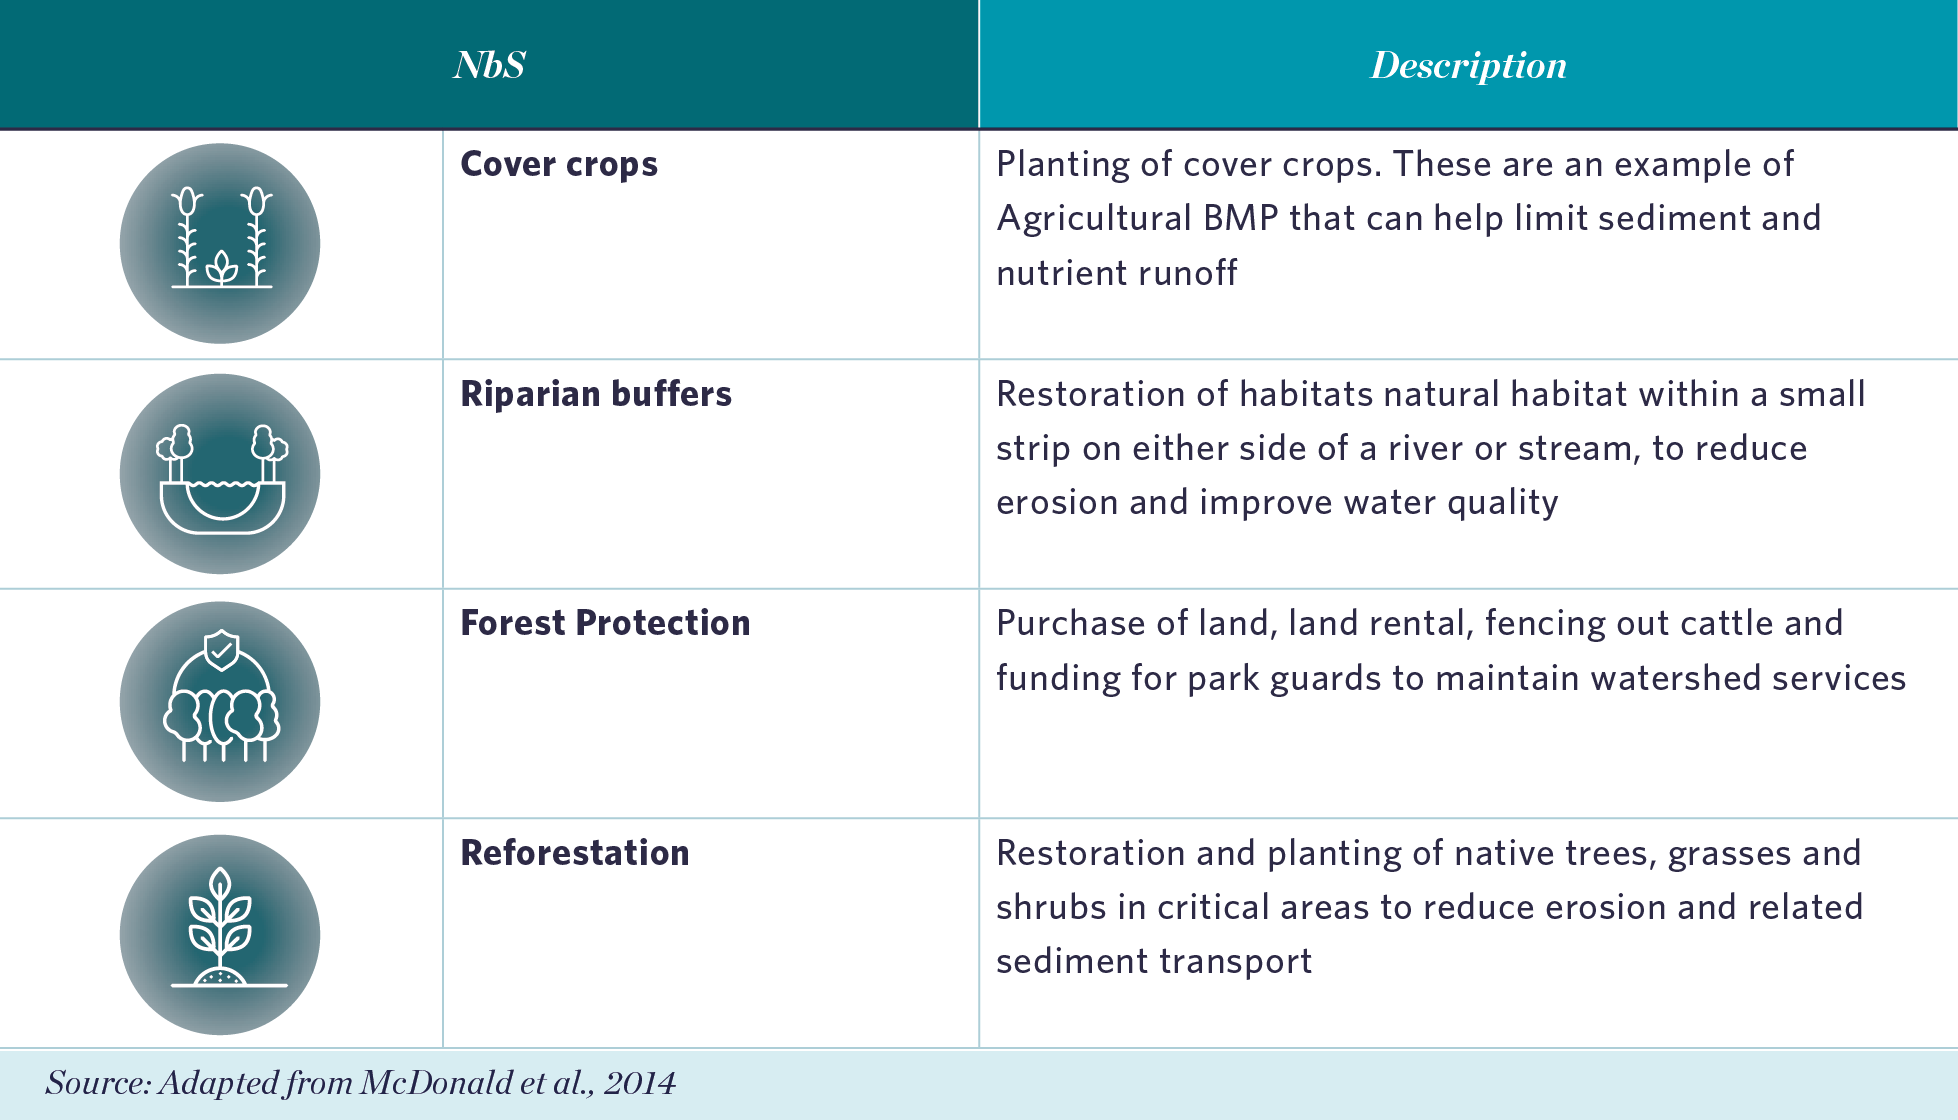 table showing descriptions of four nature-based solutions, cover crops, riparian buffers, forest protection, and reforestation